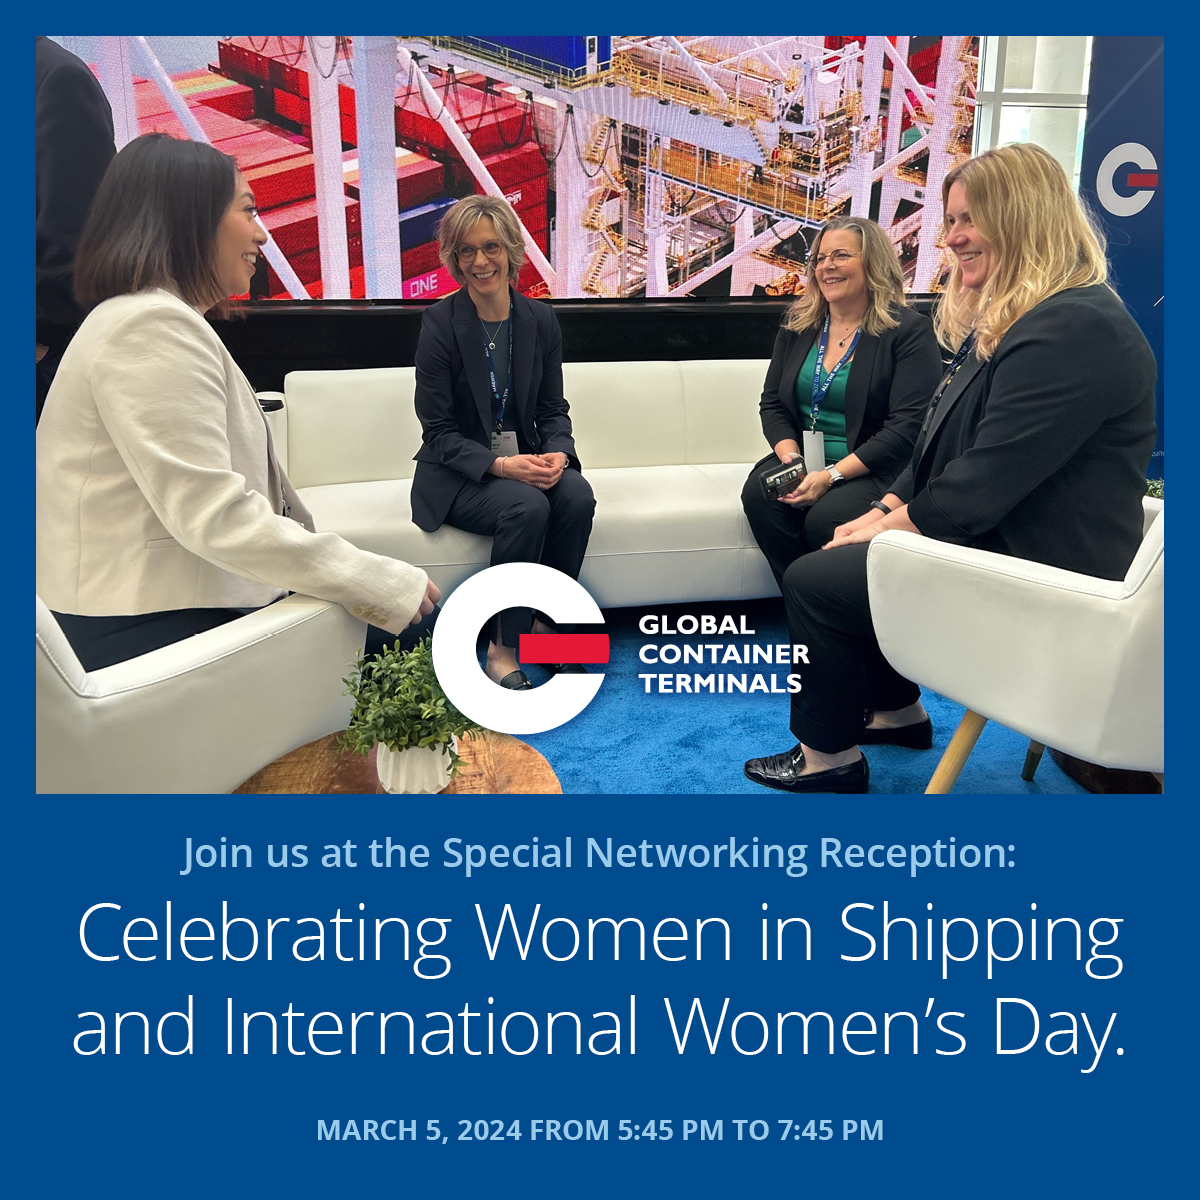 Let's celebrate Women in Shipping at the TPM Special Networking Reception! Join us for this evening as we honour the remarkable women driving the marine industry. @JOC_Events @SPGlobalRatings #synclogistics #womeninshipping